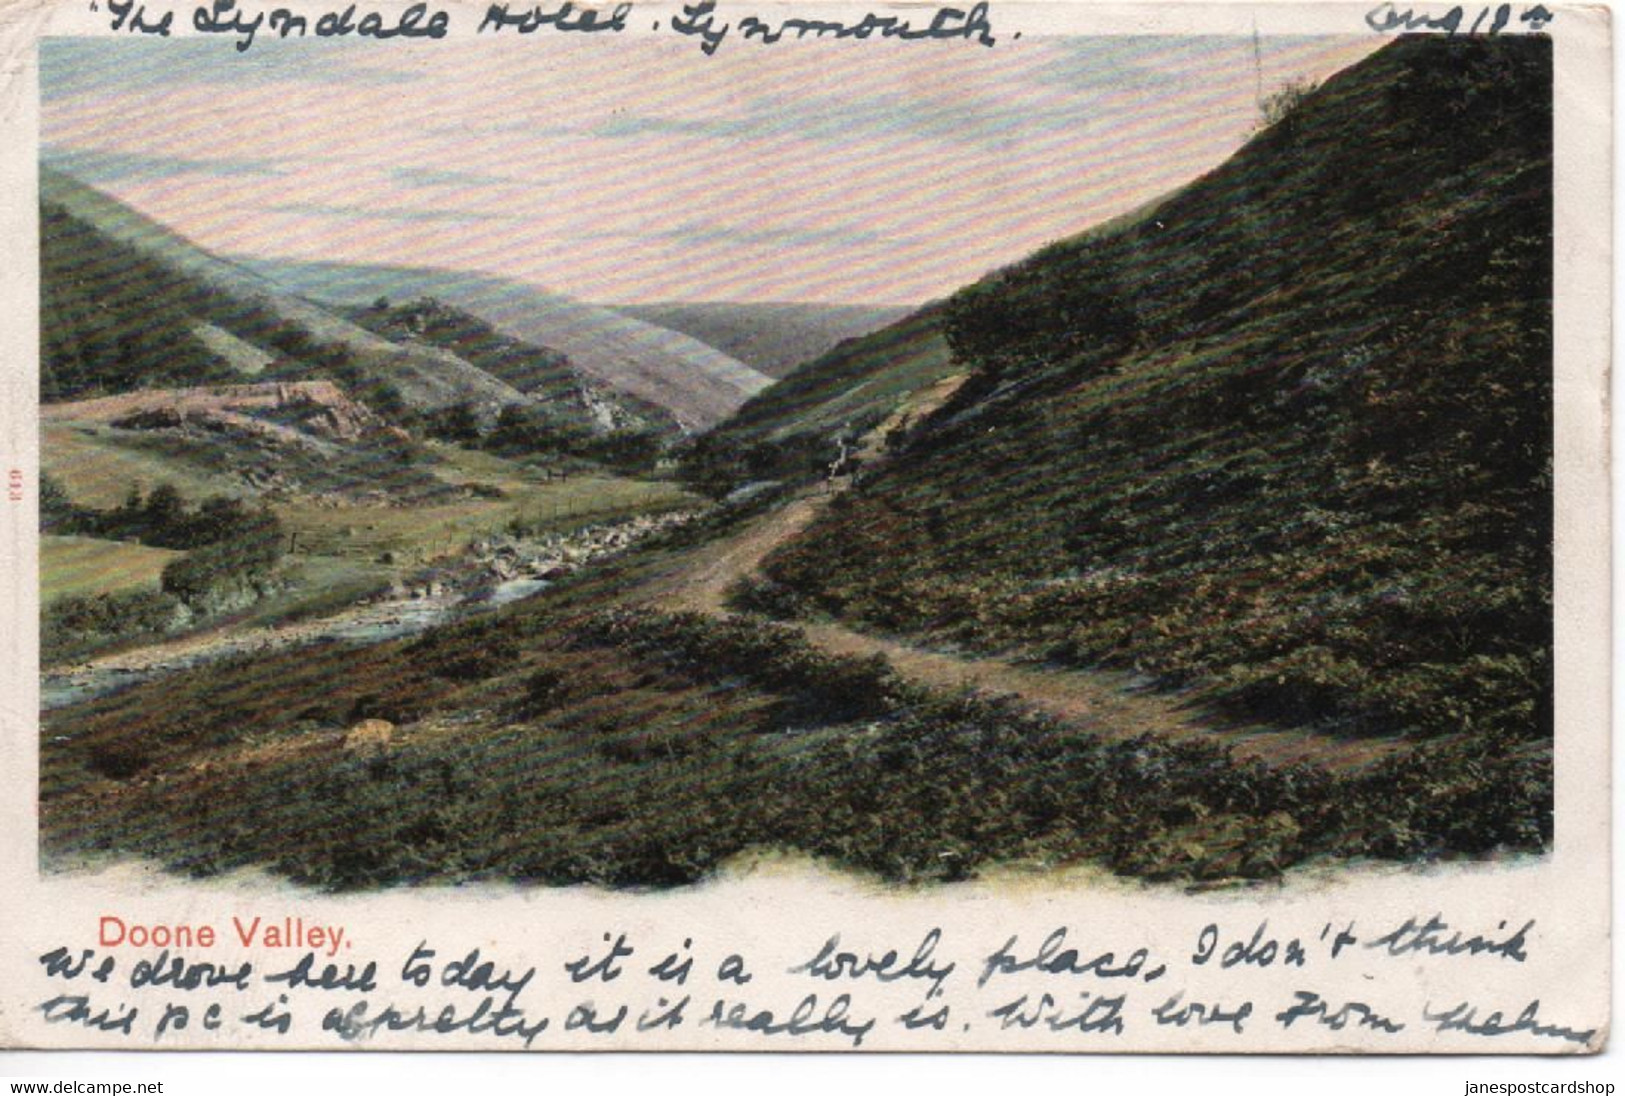 DOONE VALLEY - NORTH DEVON - WITH GOOD LYNMOUTH SQUARE CIRCLE POSTMARK AND ADDRESSED TO COKEHAM MANOR SOMPTING SUSSEX - Lynmouth & Lynton